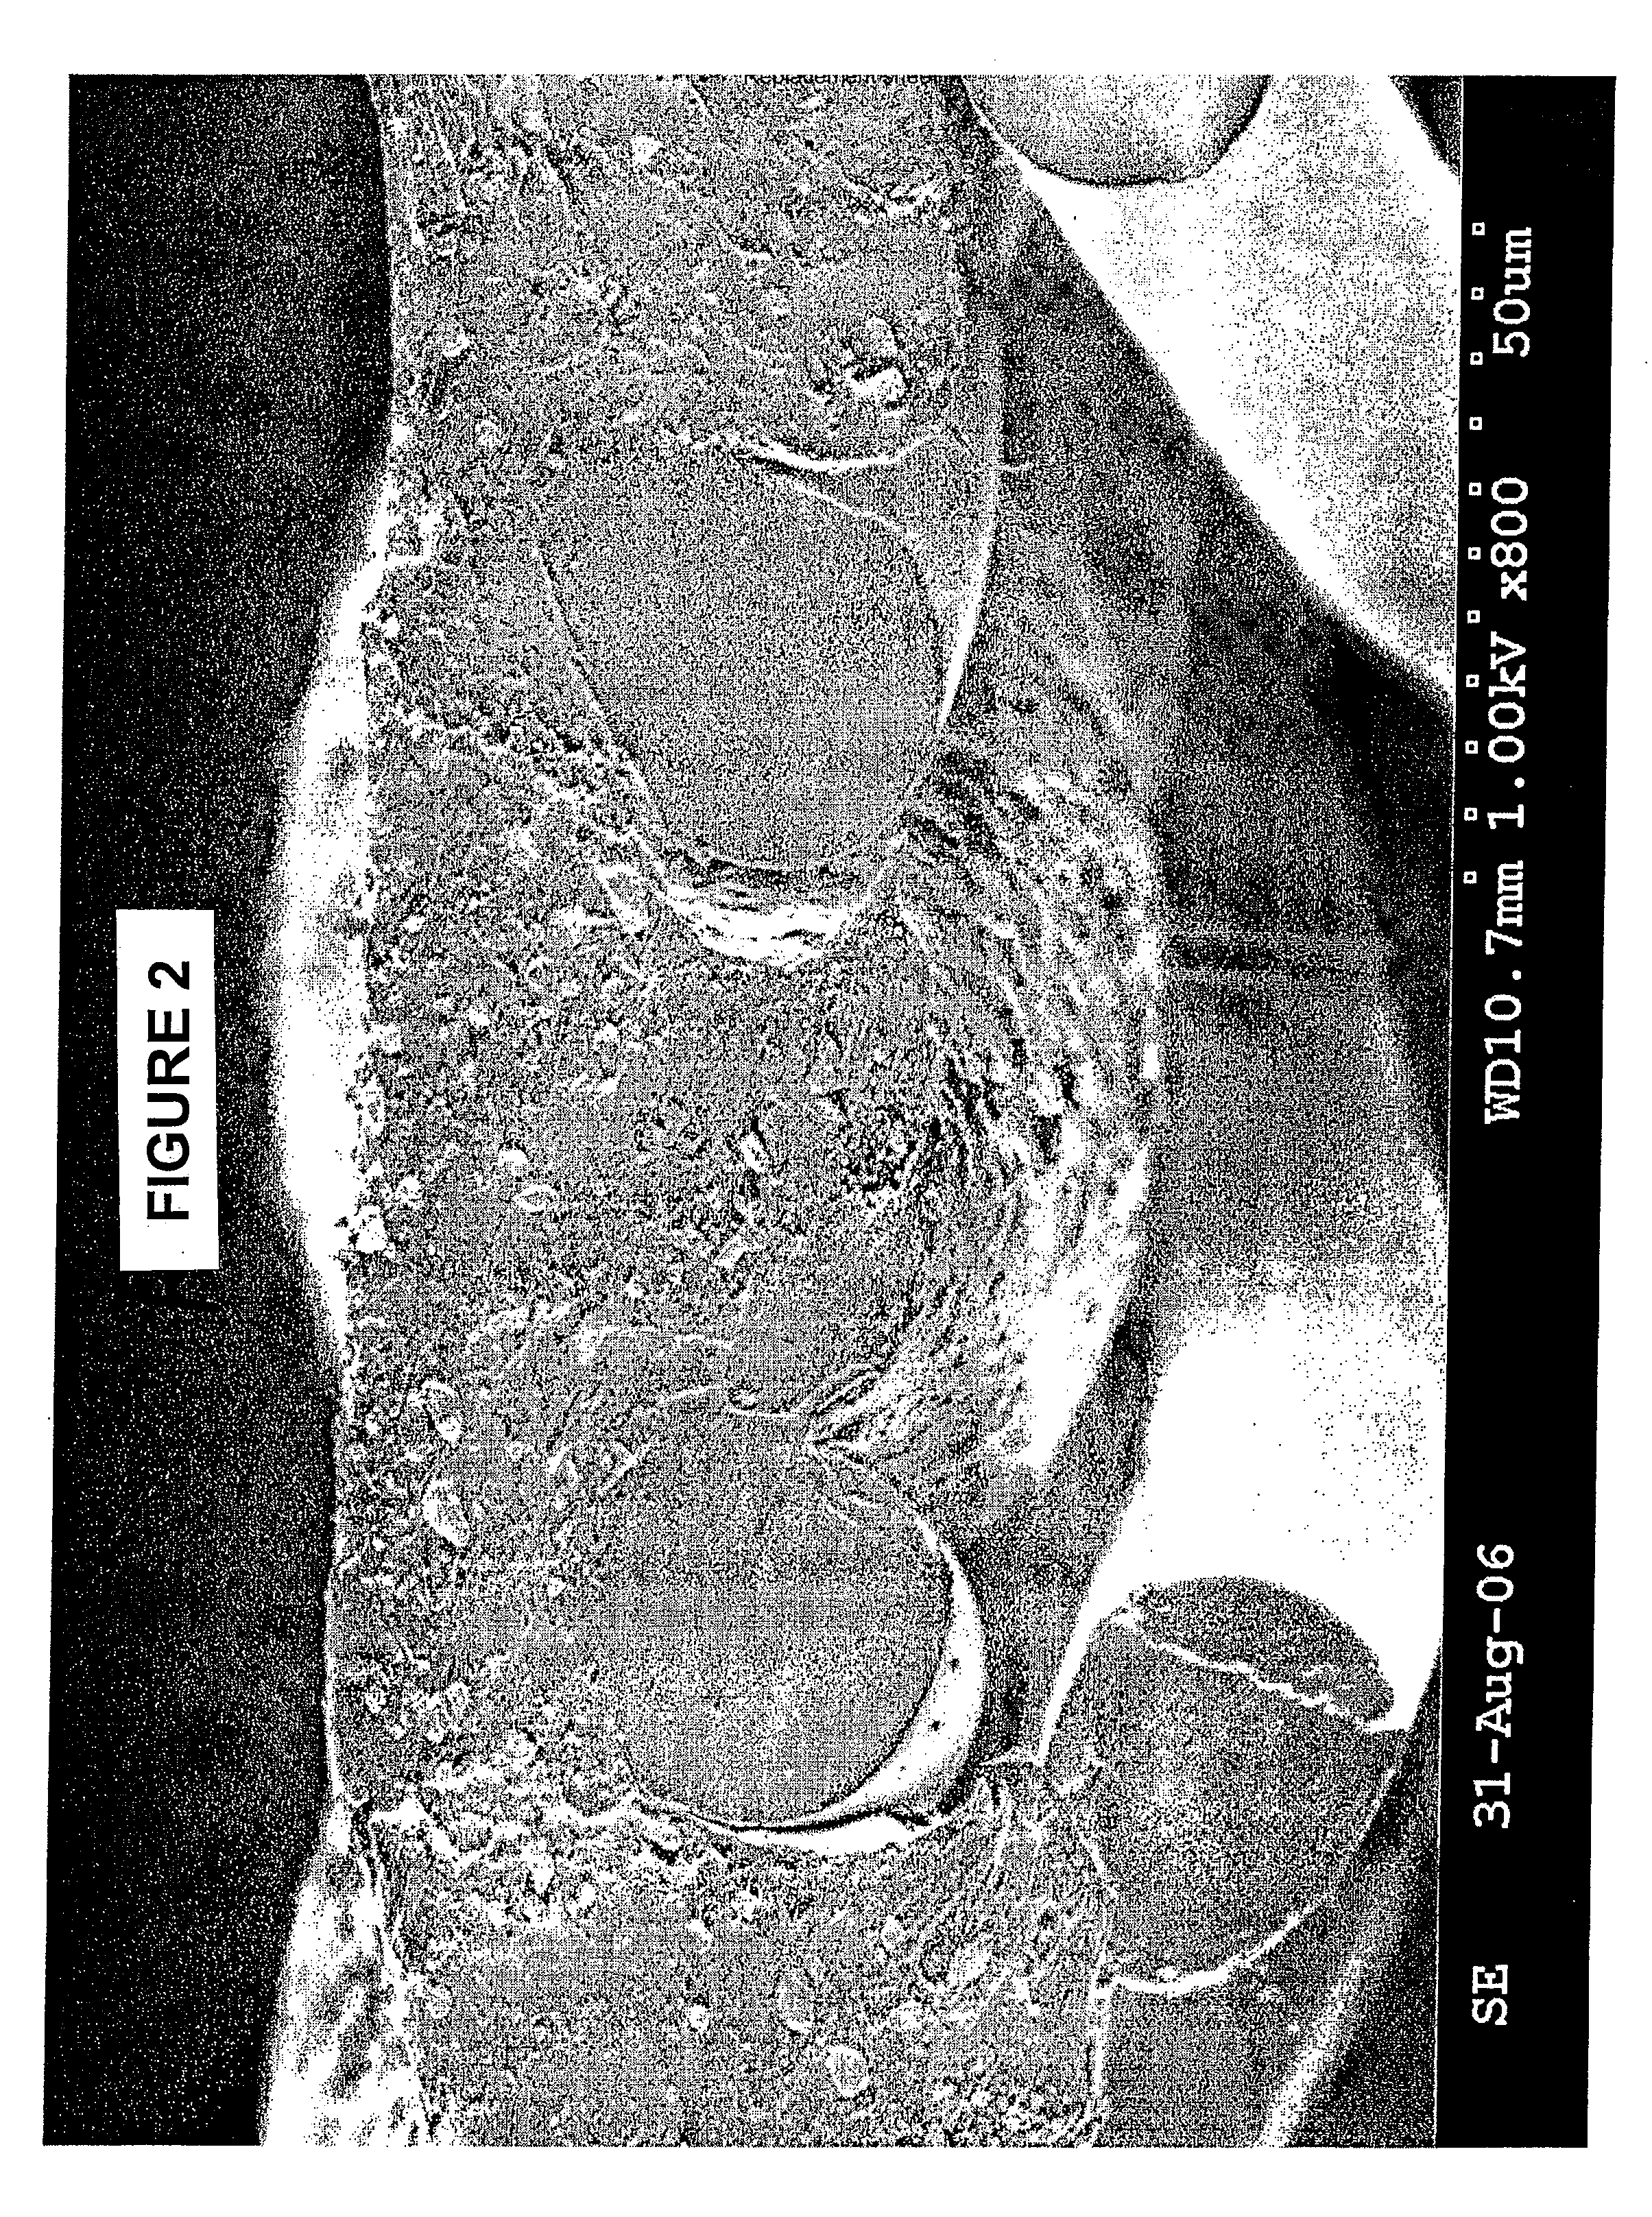 Breathable Laminate With A High Abrasion Resistance and Method of Manufacturing the Same